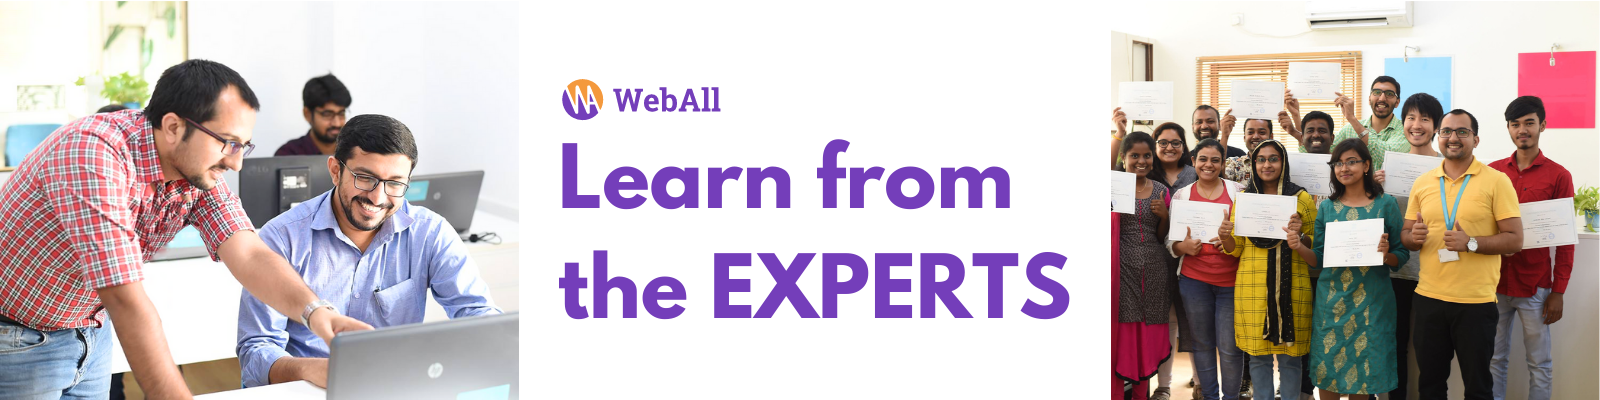 learn from the experts - weball.io